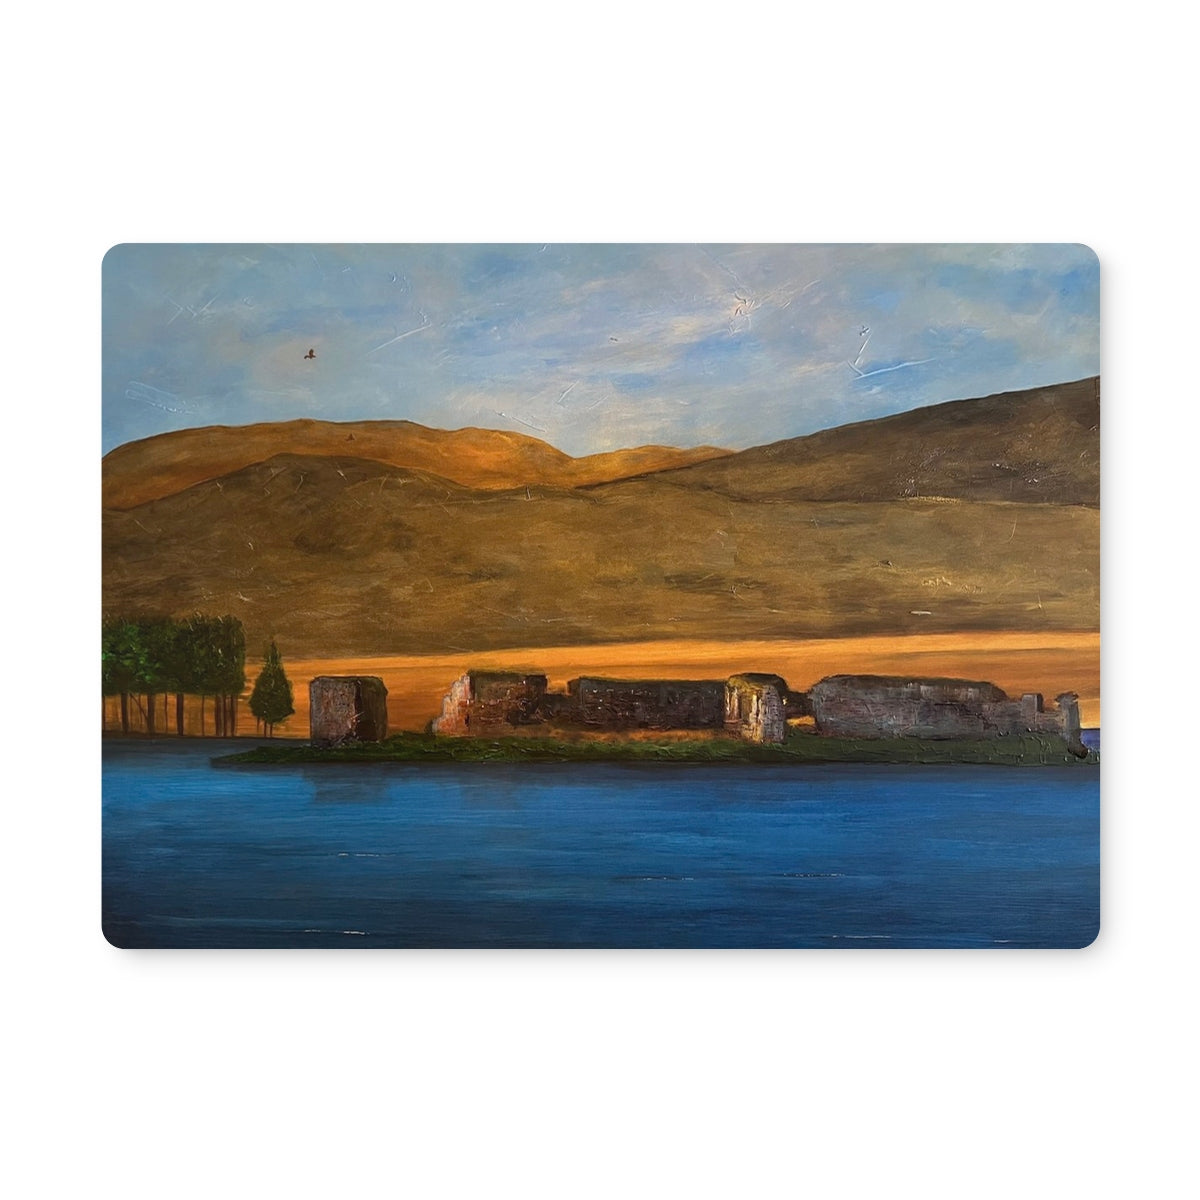 Lochindorb Castle Art Gifts Placemat-Placemats-Scottish Lochs & Mountains Art Gallery-2 Placemats-Paintings, Prints, Homeware, Art Gifts From Scotland By Scottish Artist Kevin Hunter